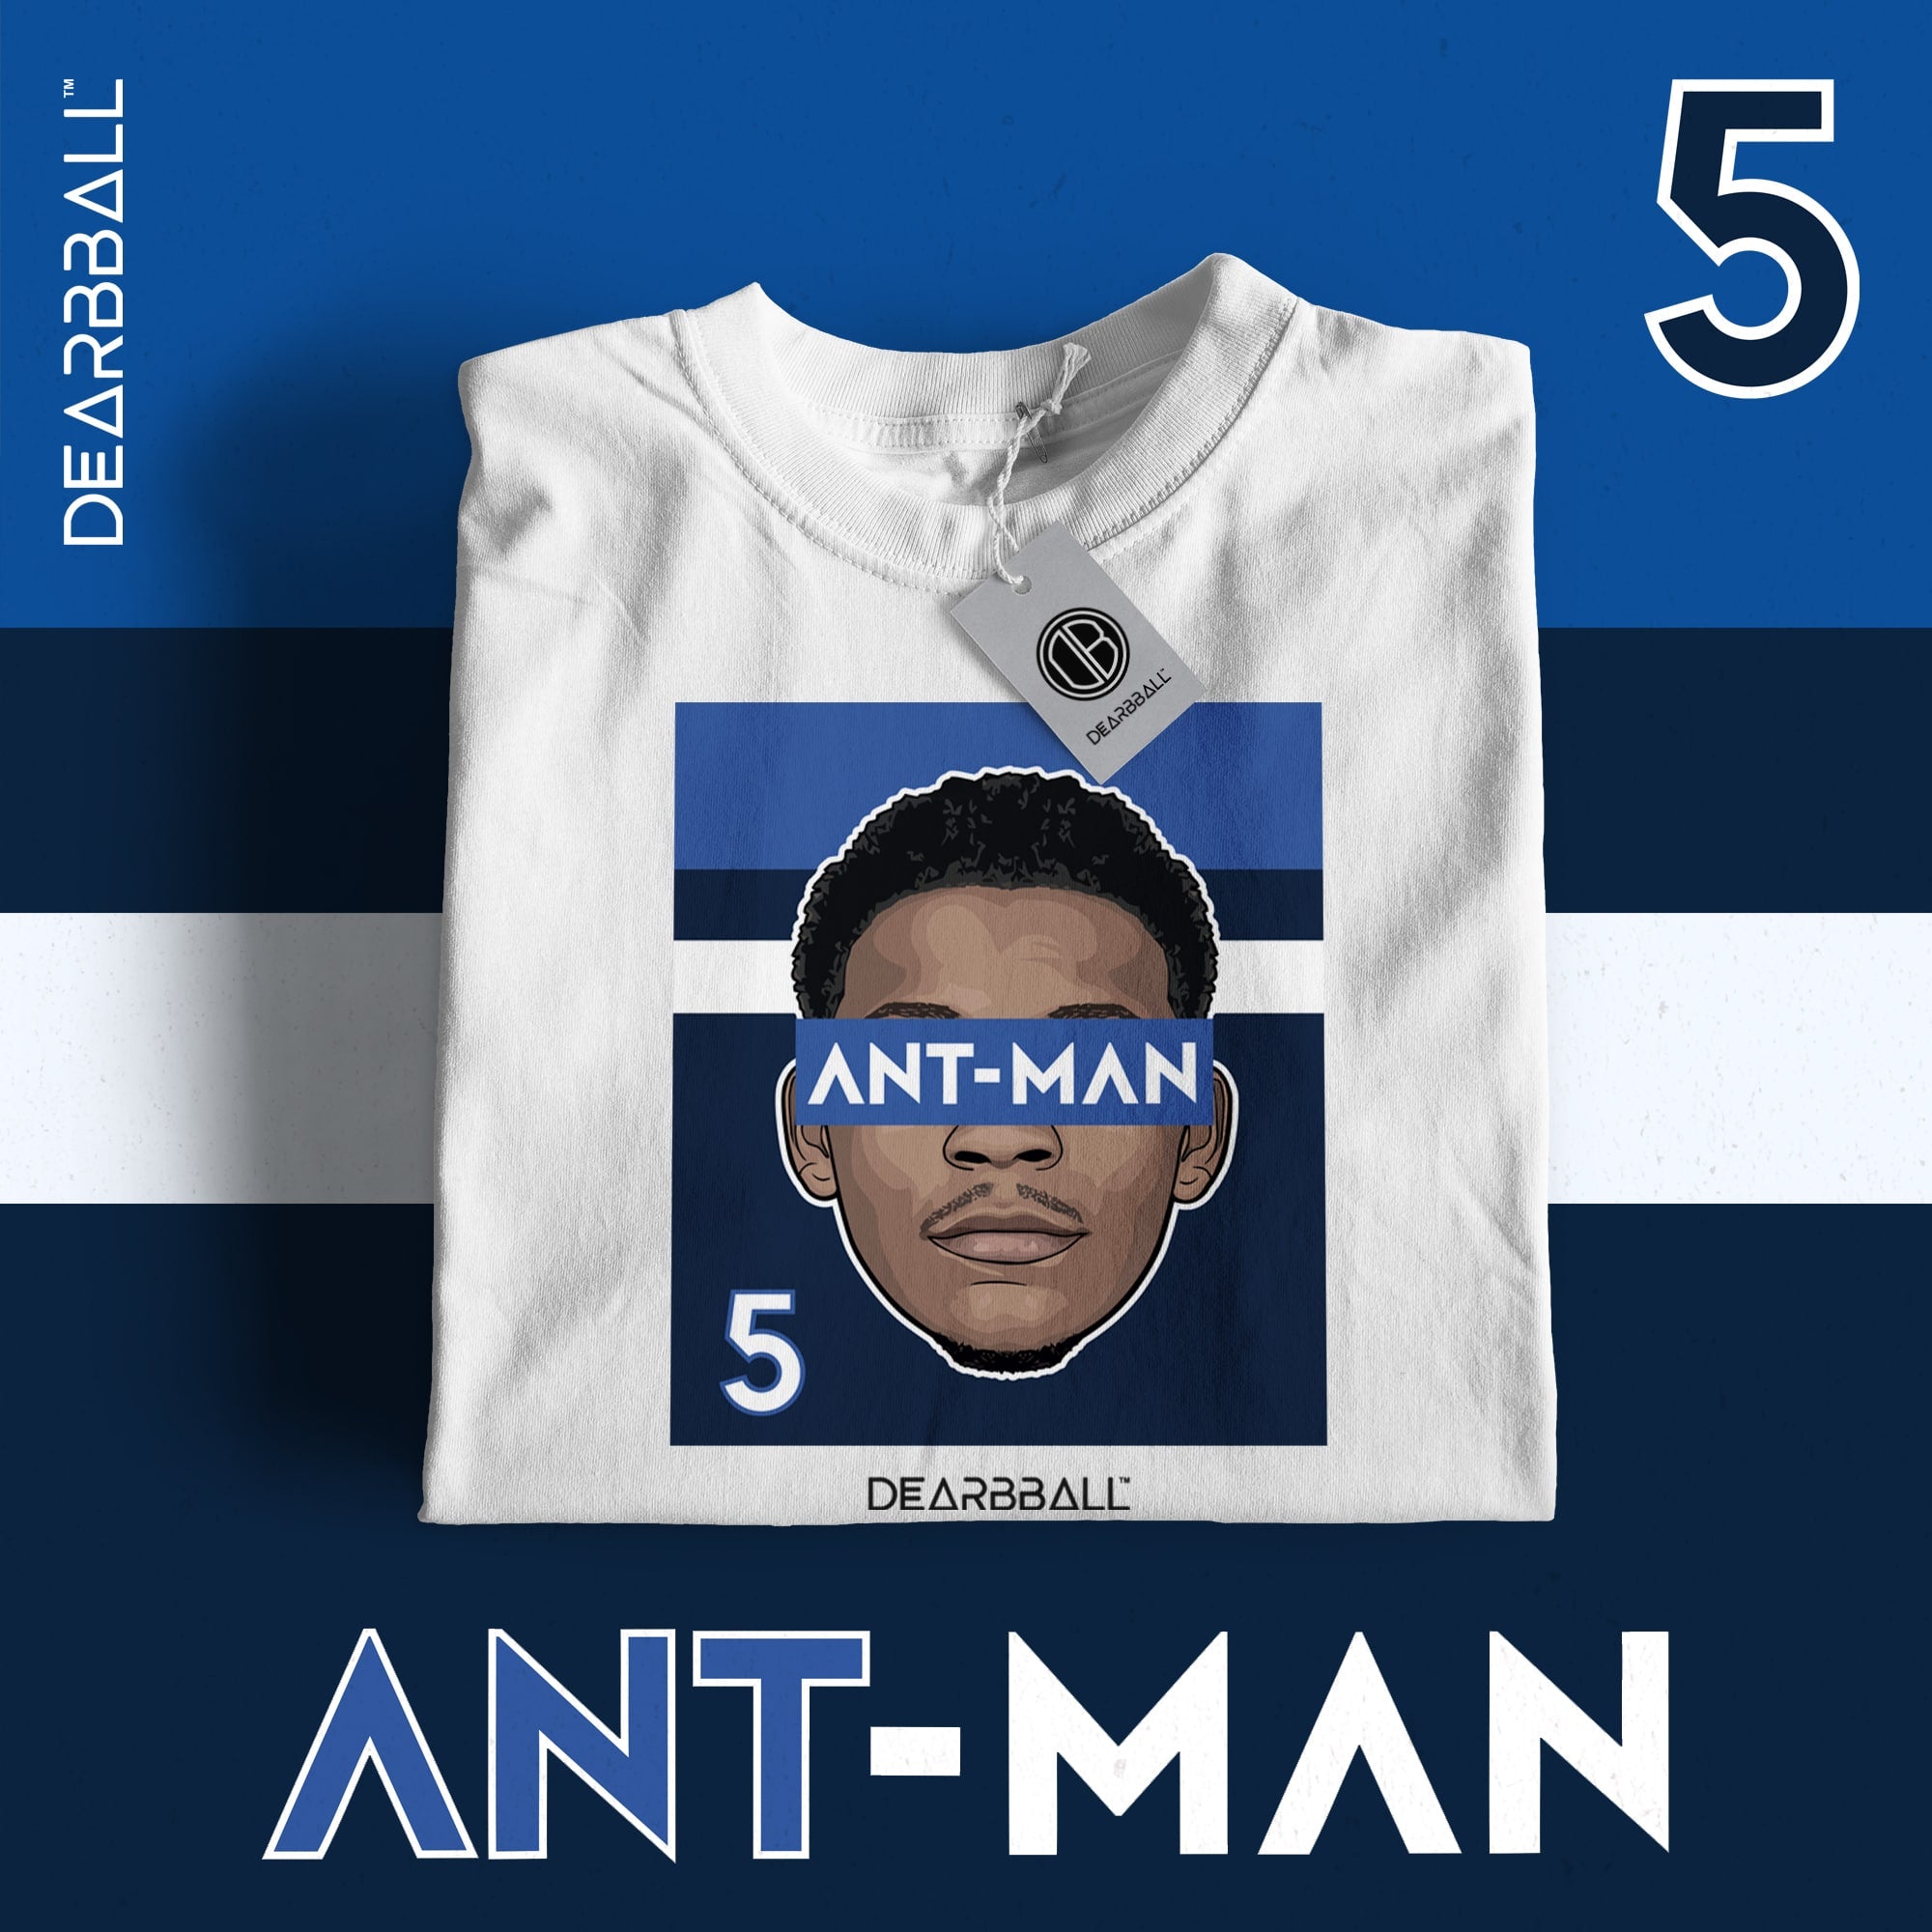 [CHILD] DearBBall T-Shirt - ANT-MAN Edition